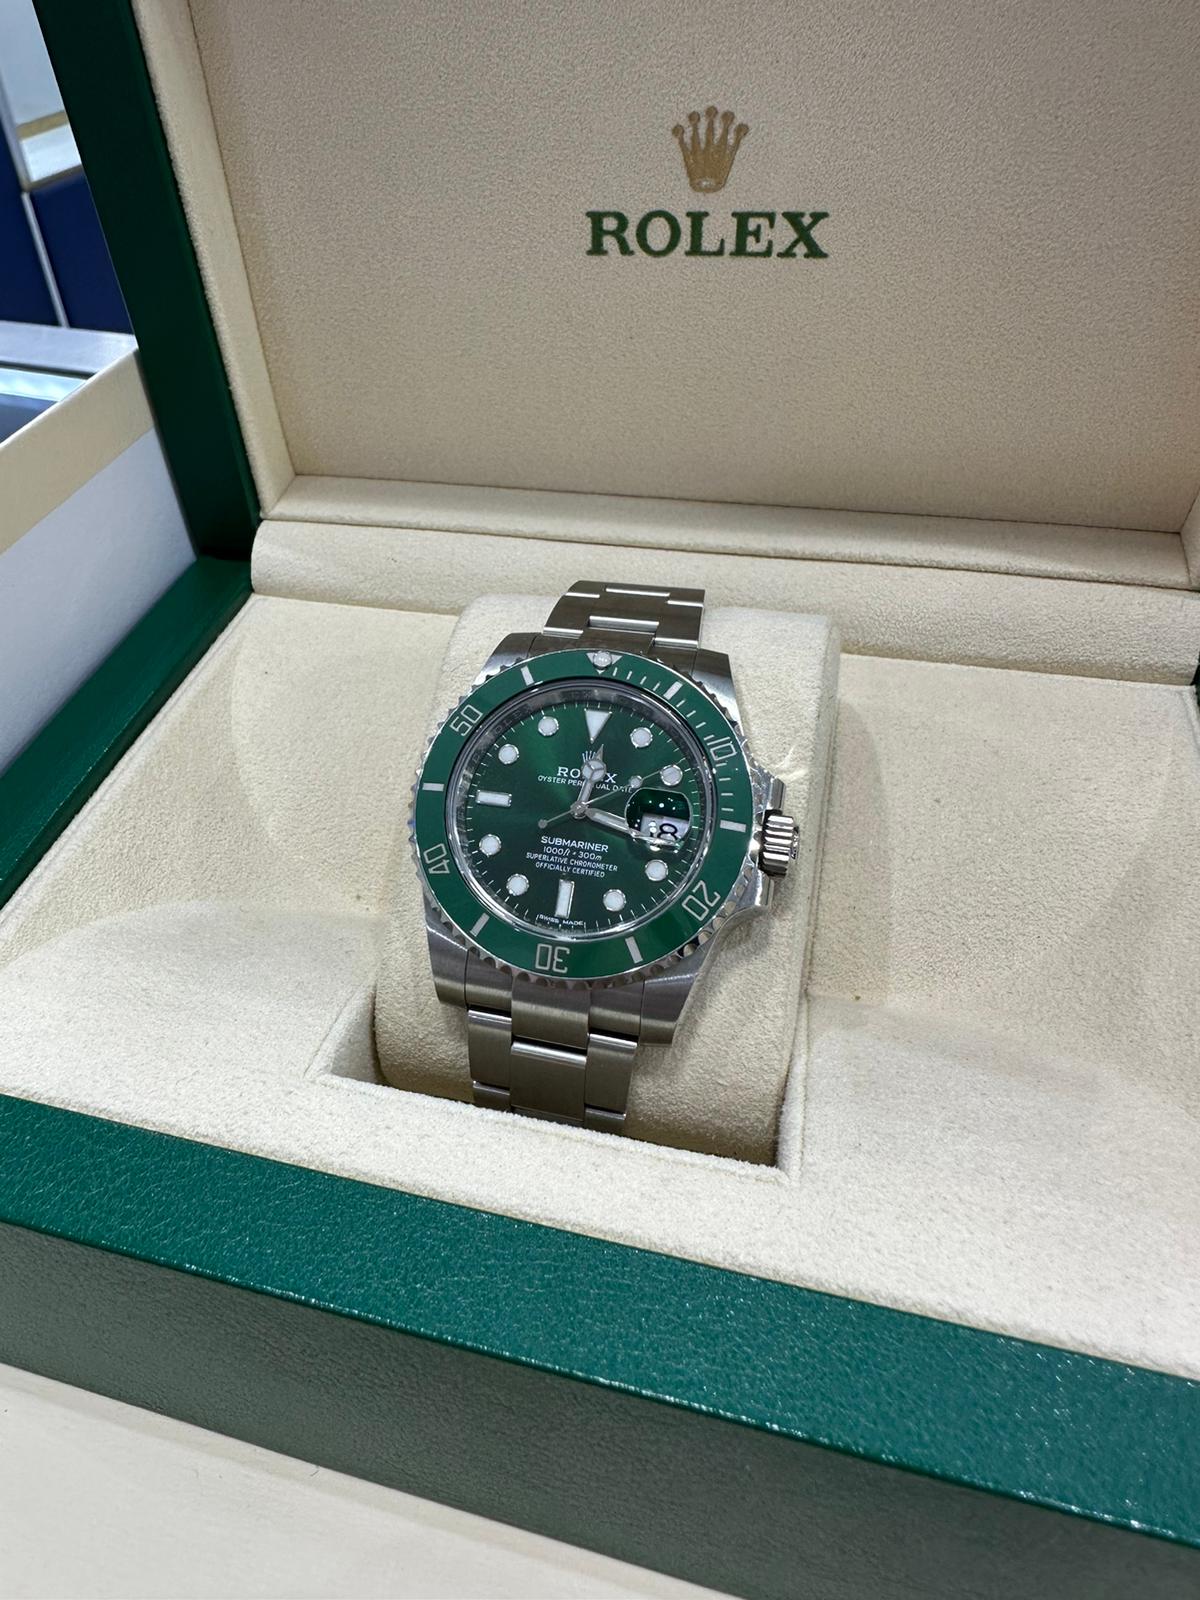 Rolex Submariner Hulk discontinued watch 2019 with - Image 10 of 10